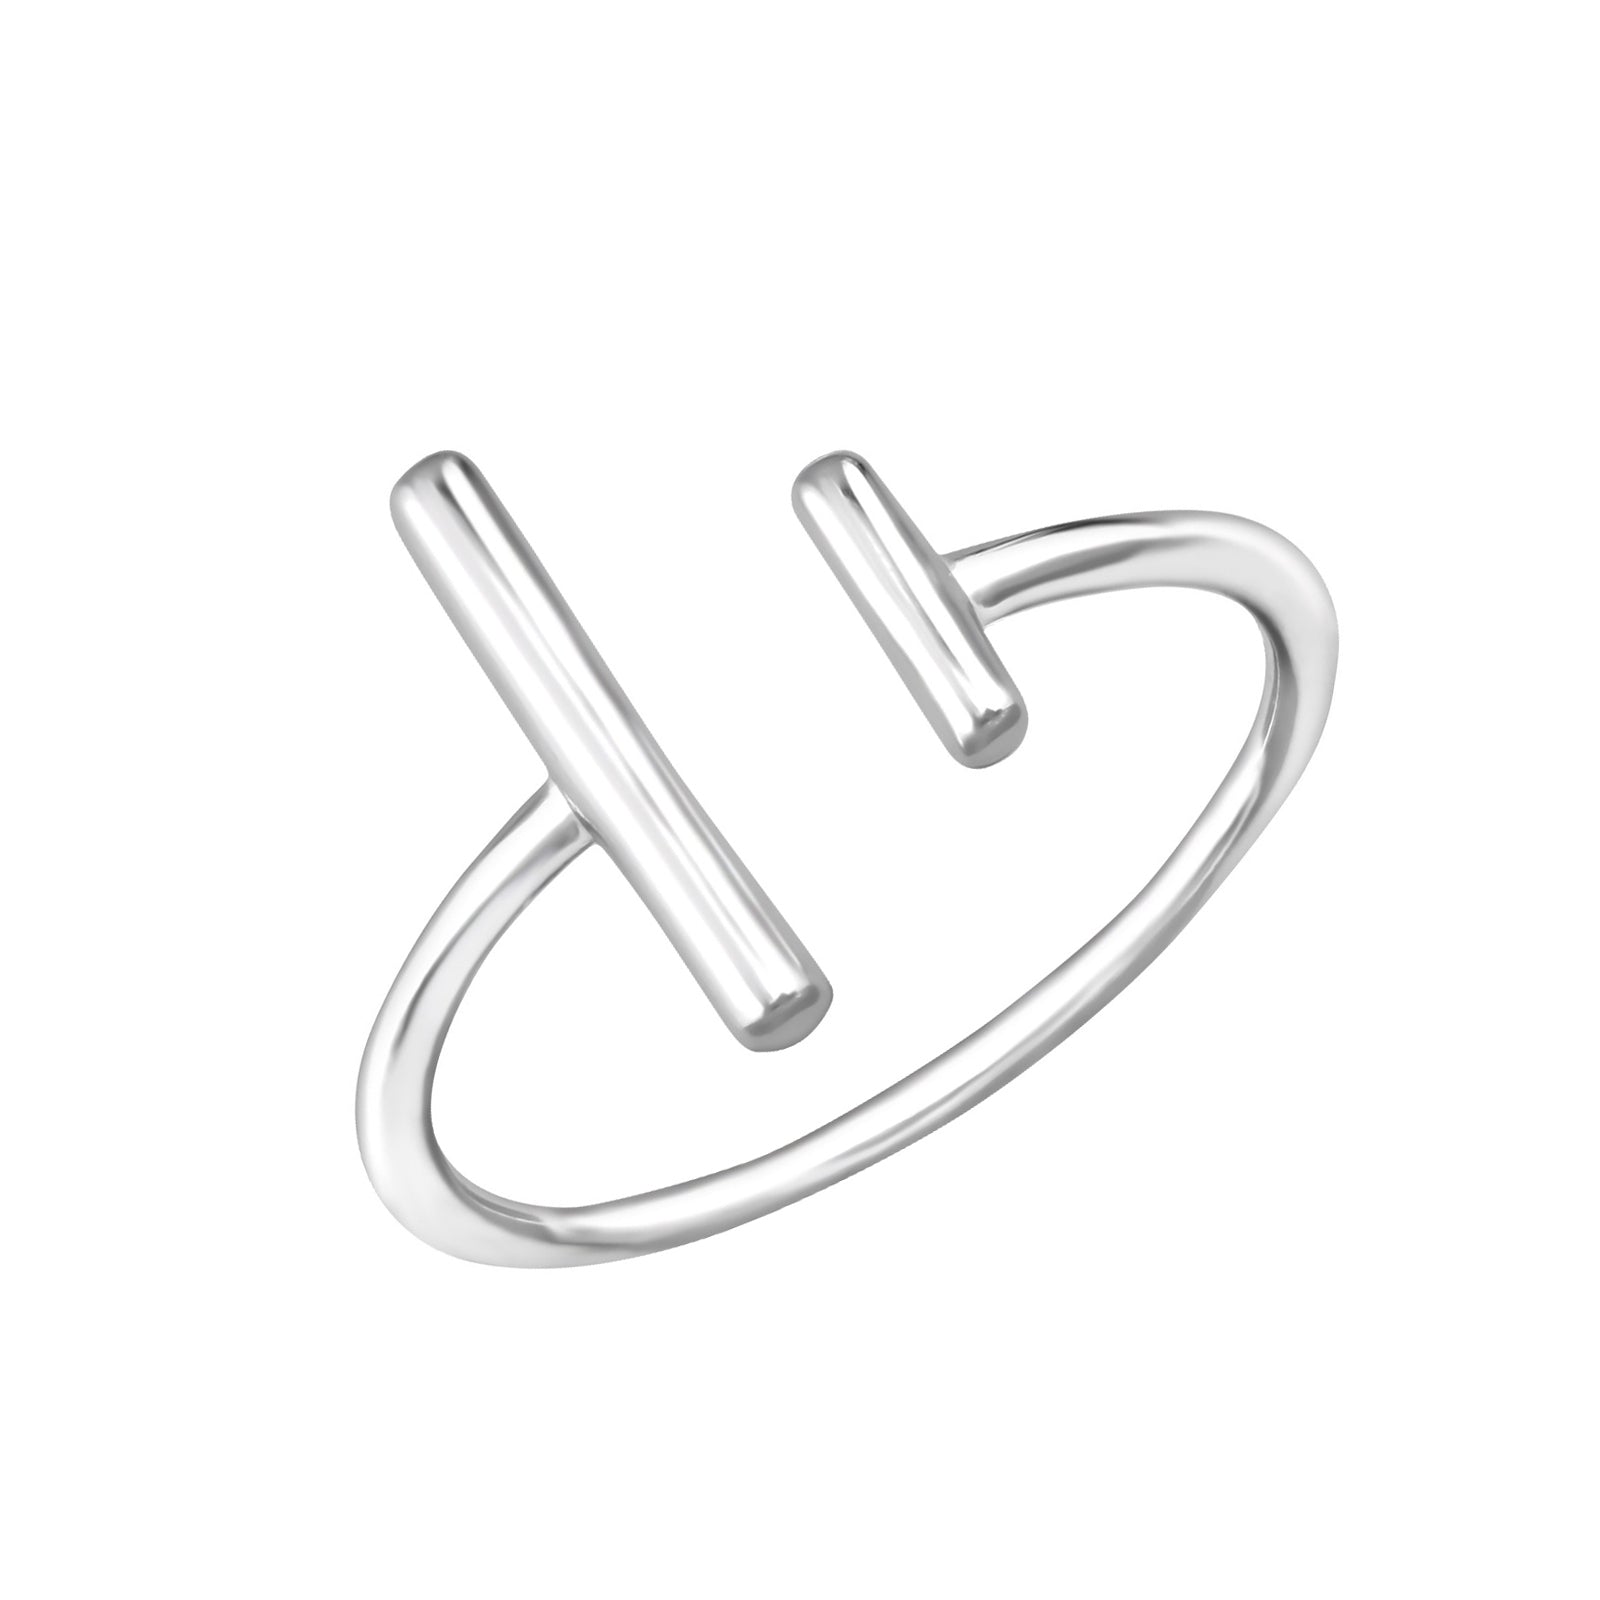 INEL ARGINT 925 DOUBLE BAR rings > silver ring > double bar ring > bar ring > gifts for her > gifts for girls > gifts for moms > gifts for best friend > birthday gift Maison la Stephanie   